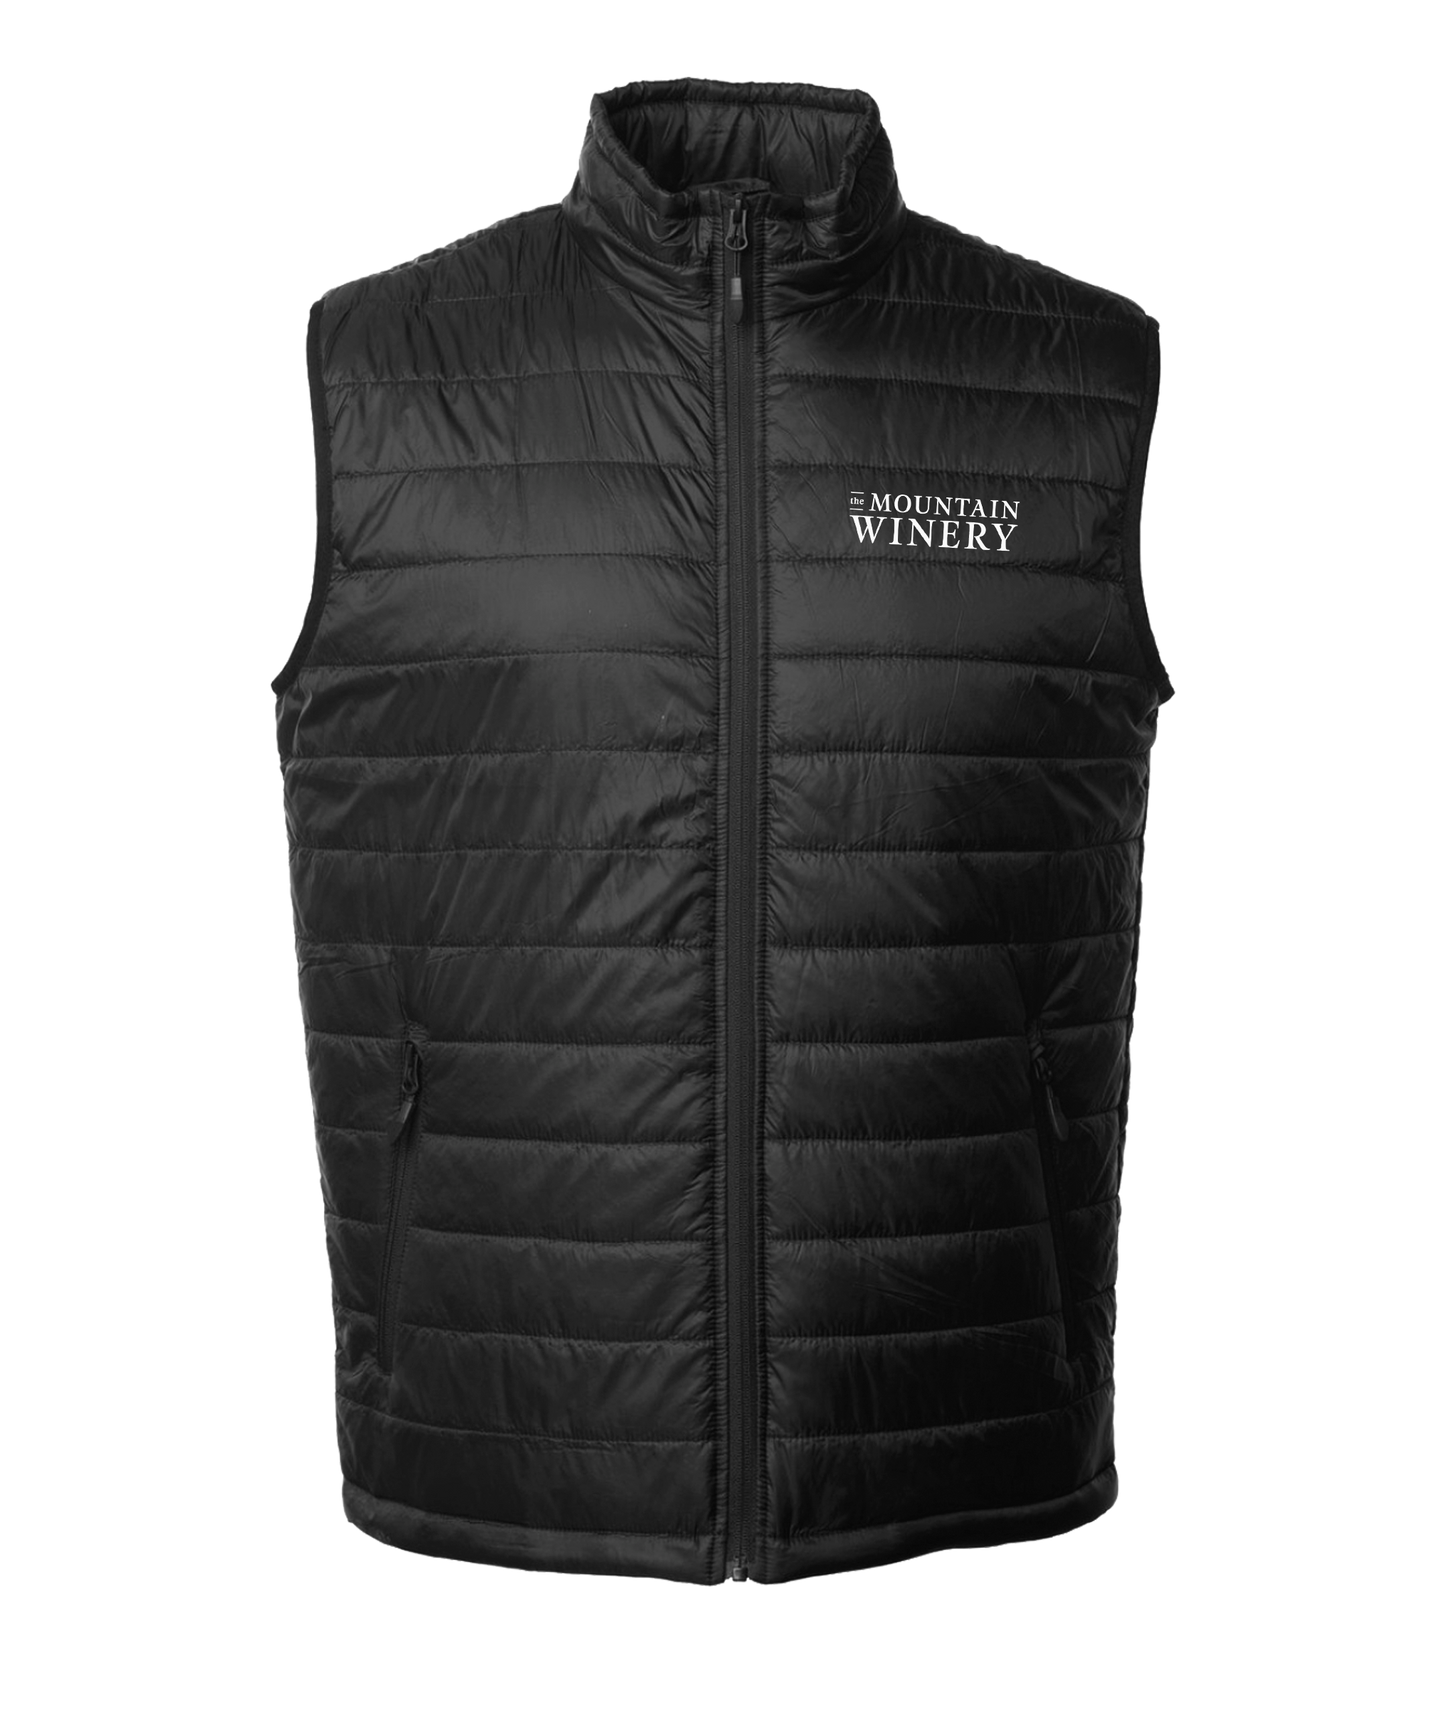 Mountain Winery - Mens Puffy Vest